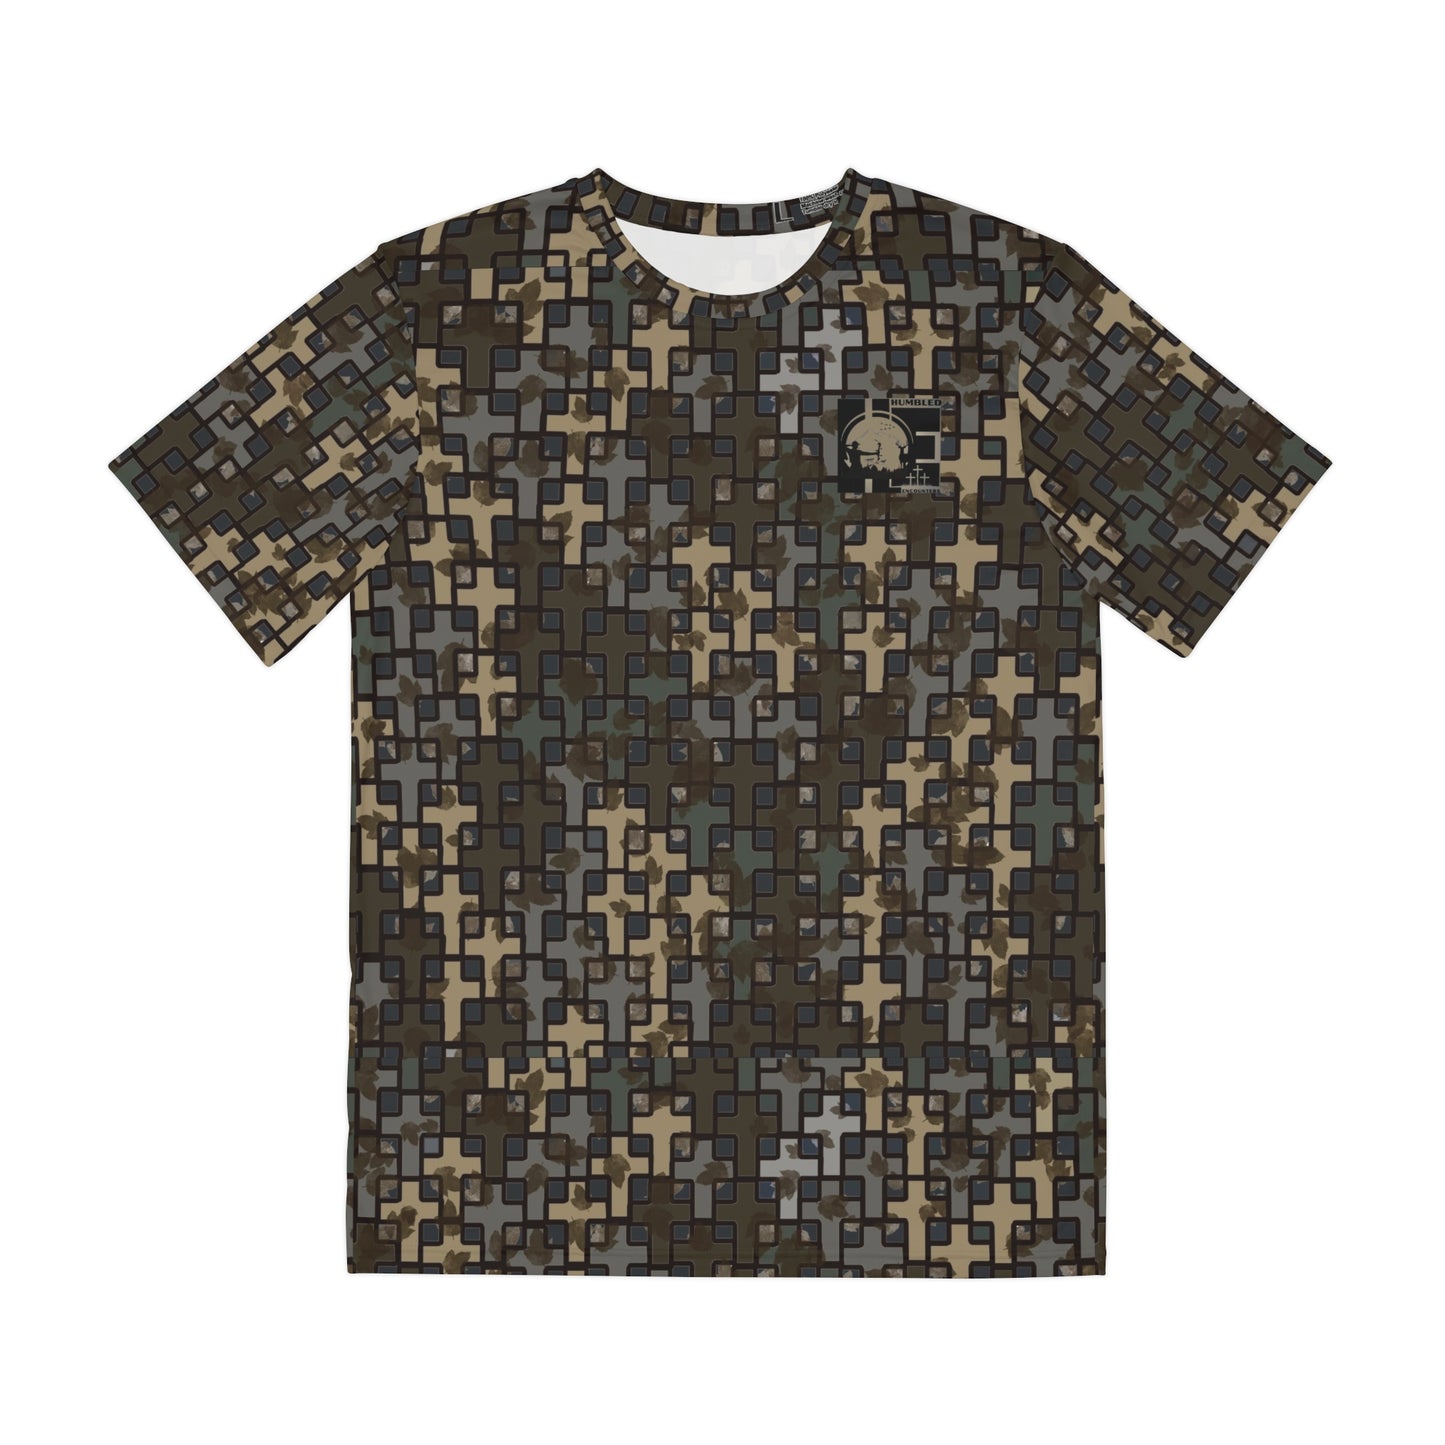 Humbled Encounters in Wandering the Wilderness Stubblefield Camo short sleeve T-shirt.